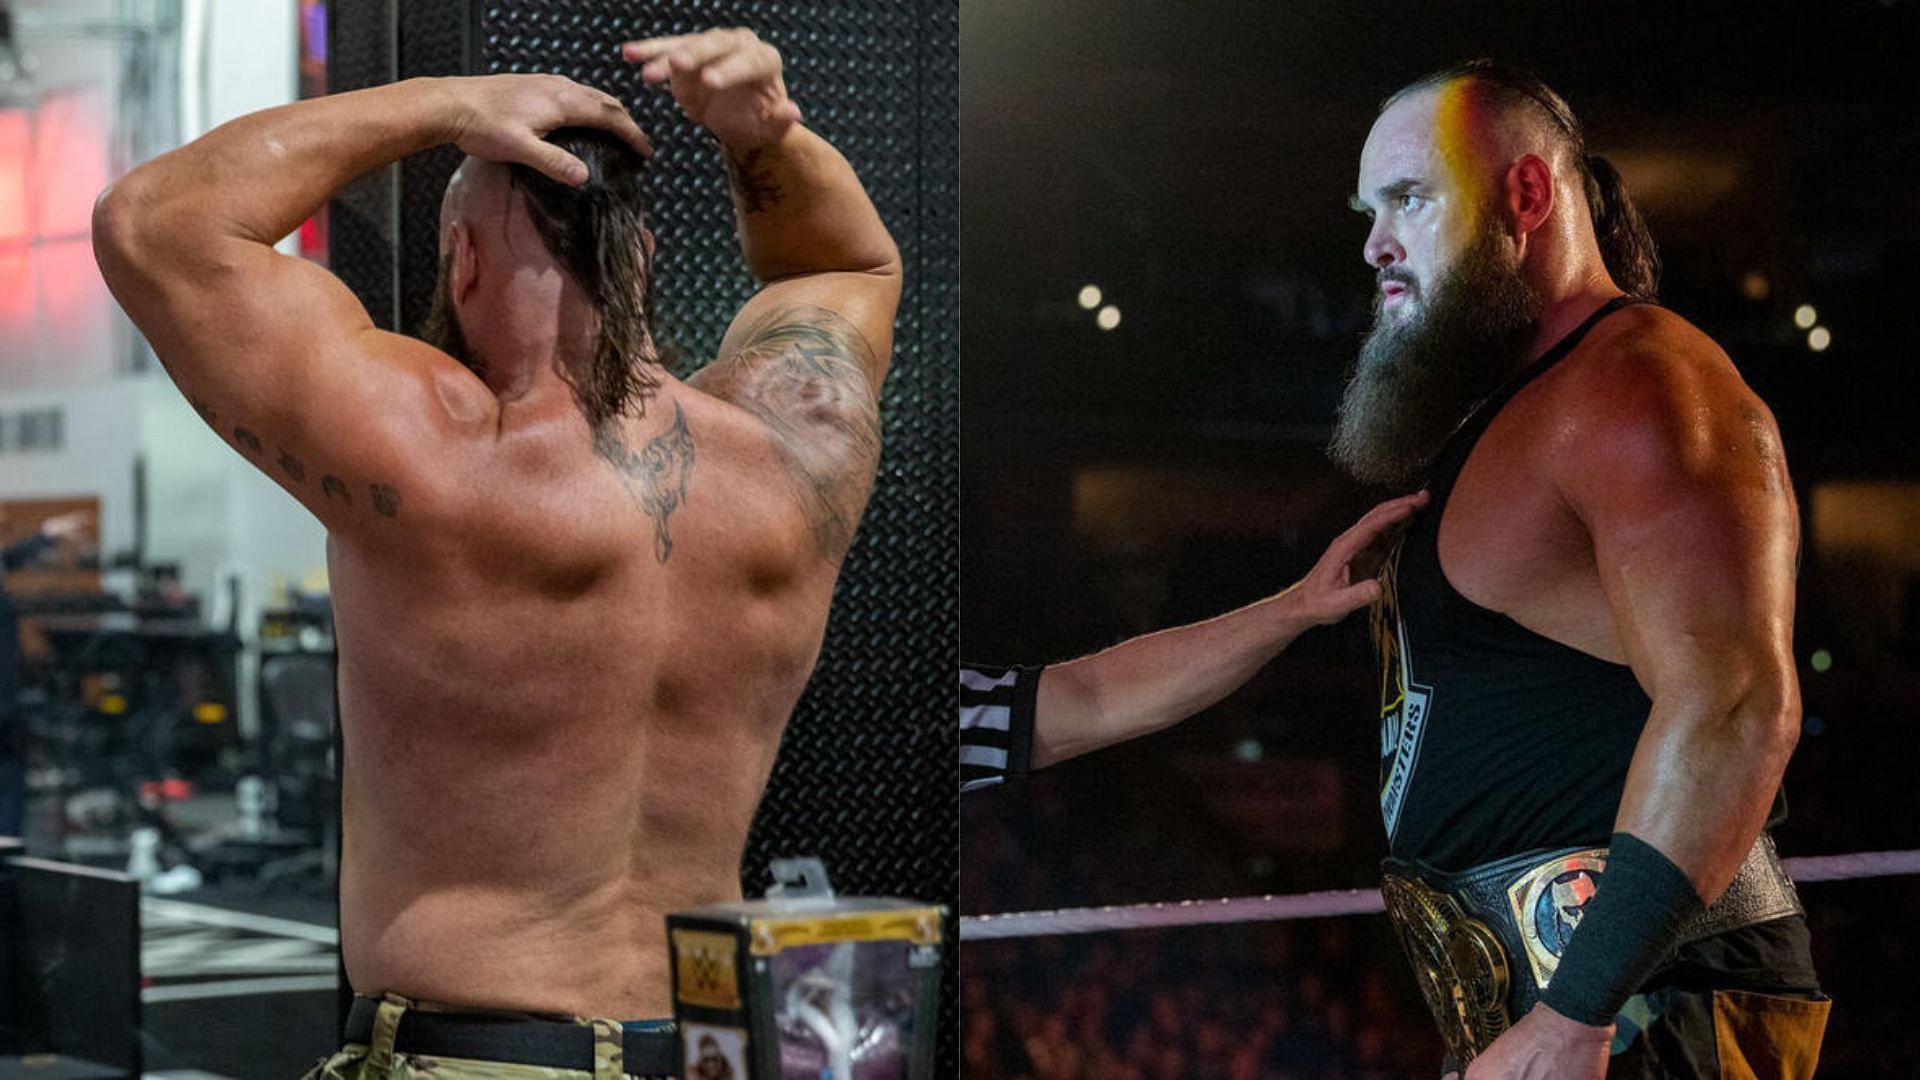 Braun Strowman is currently sidelined due to an injury